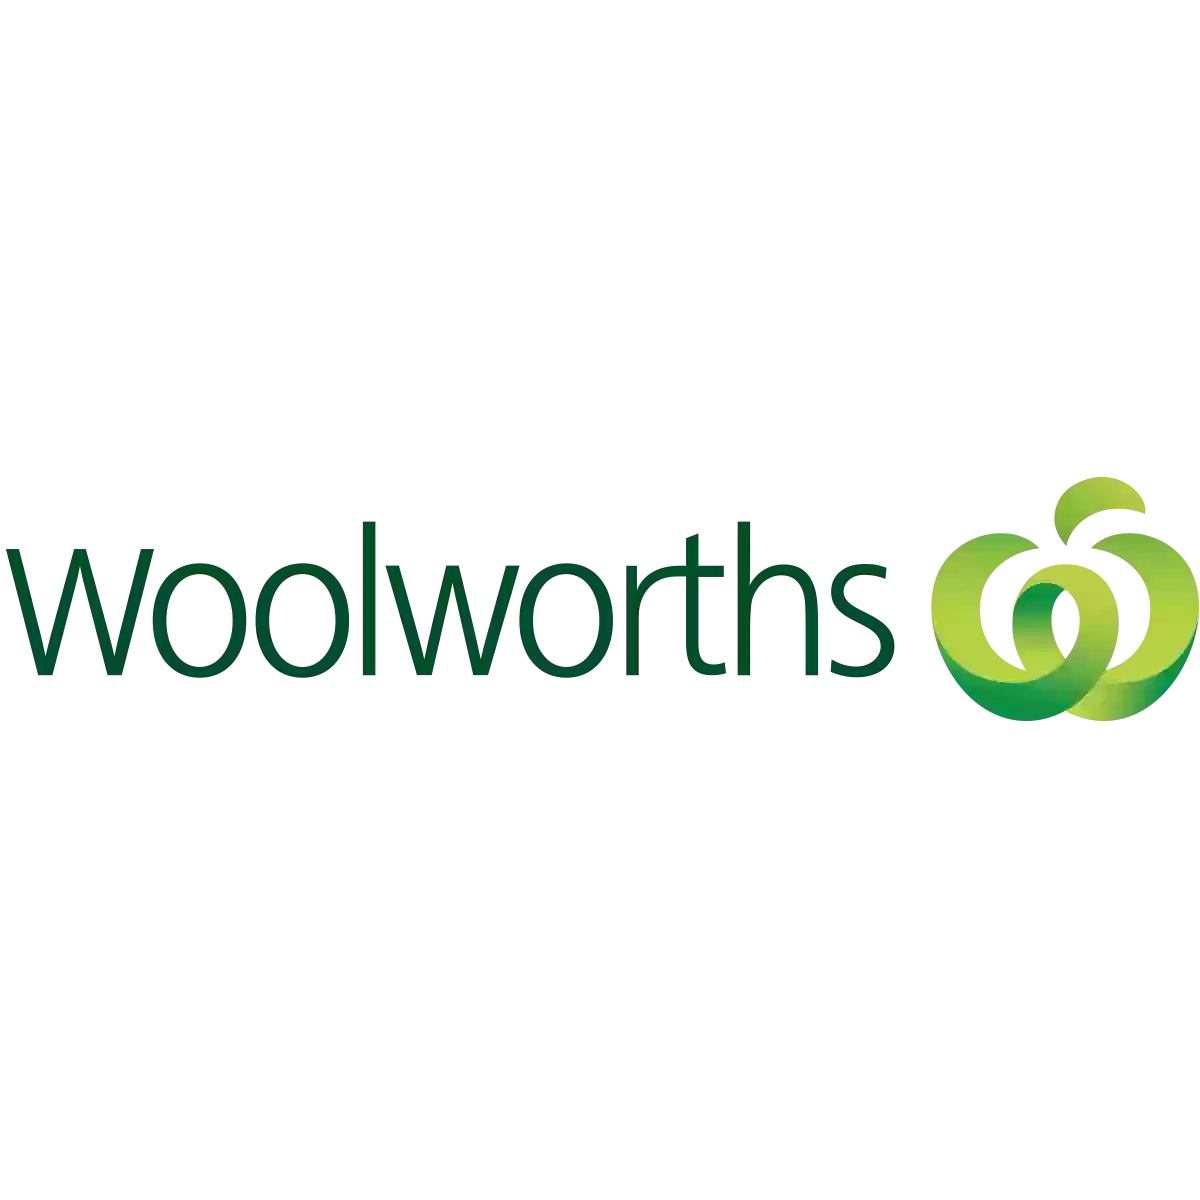 Woolworths The Avenues